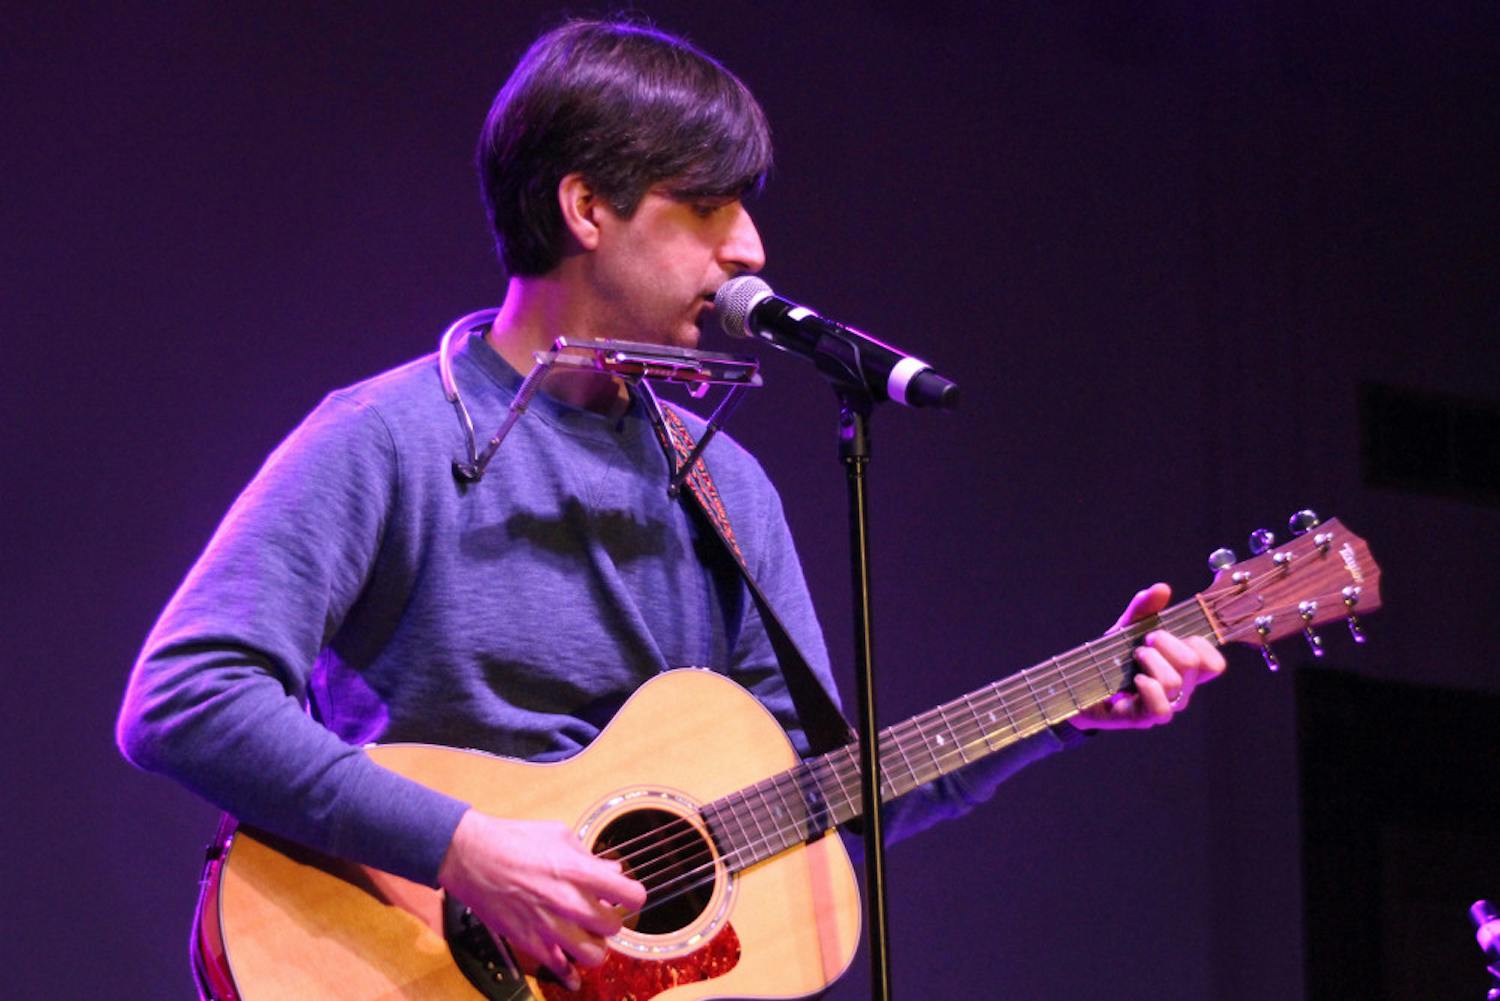 Comedian Demetri Martin performs in the Reitz Union Grand Ballroom on Friday evening during the Big Orange Festival. Martin's performance featured a wide array of jokes, which were enhanced by his use of music and drawings.